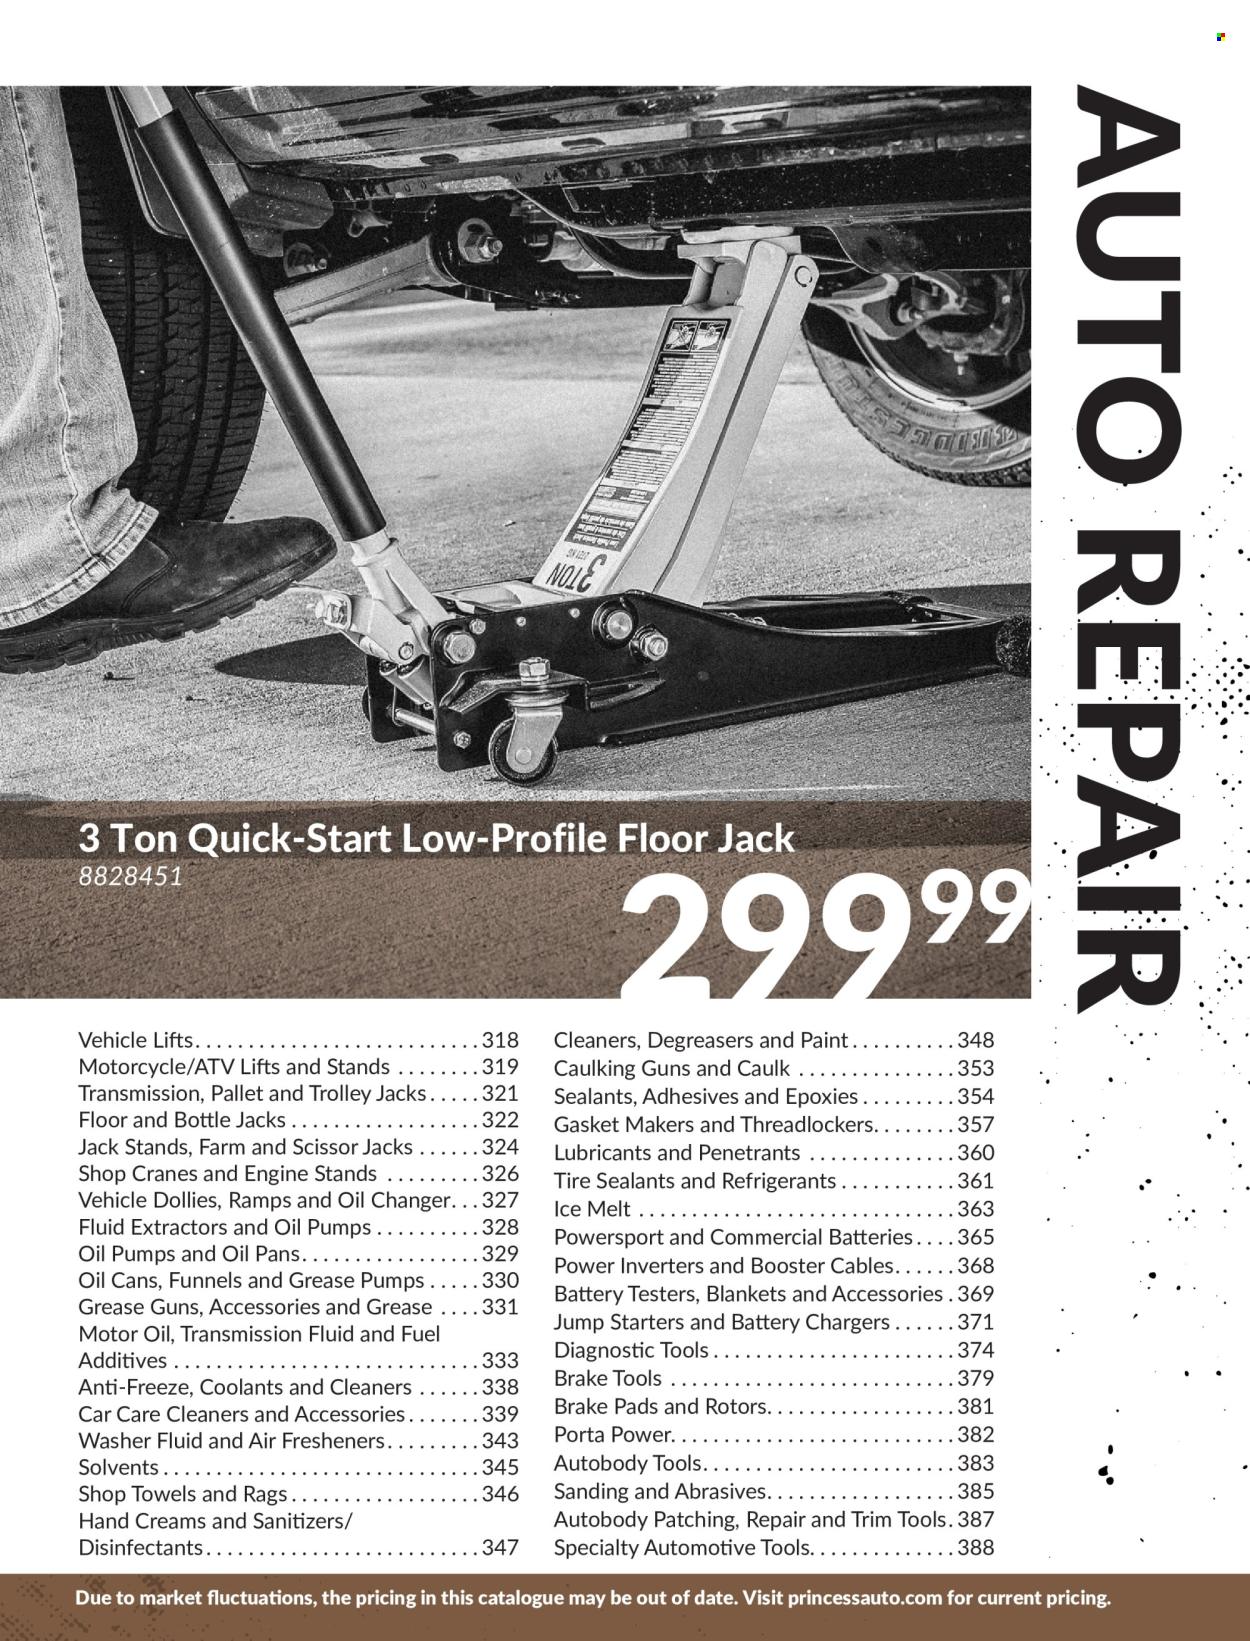 thumbnail - Princess Auto Flyer - Sales products - scissors, blanket, lubricant, trolley, vehicle, motorcycle, floor jack, brake pad, battery charger, booster cables, air freshener, ice melter, cleaner, washer fluid, motor oil, transmission fluid. Page 321.